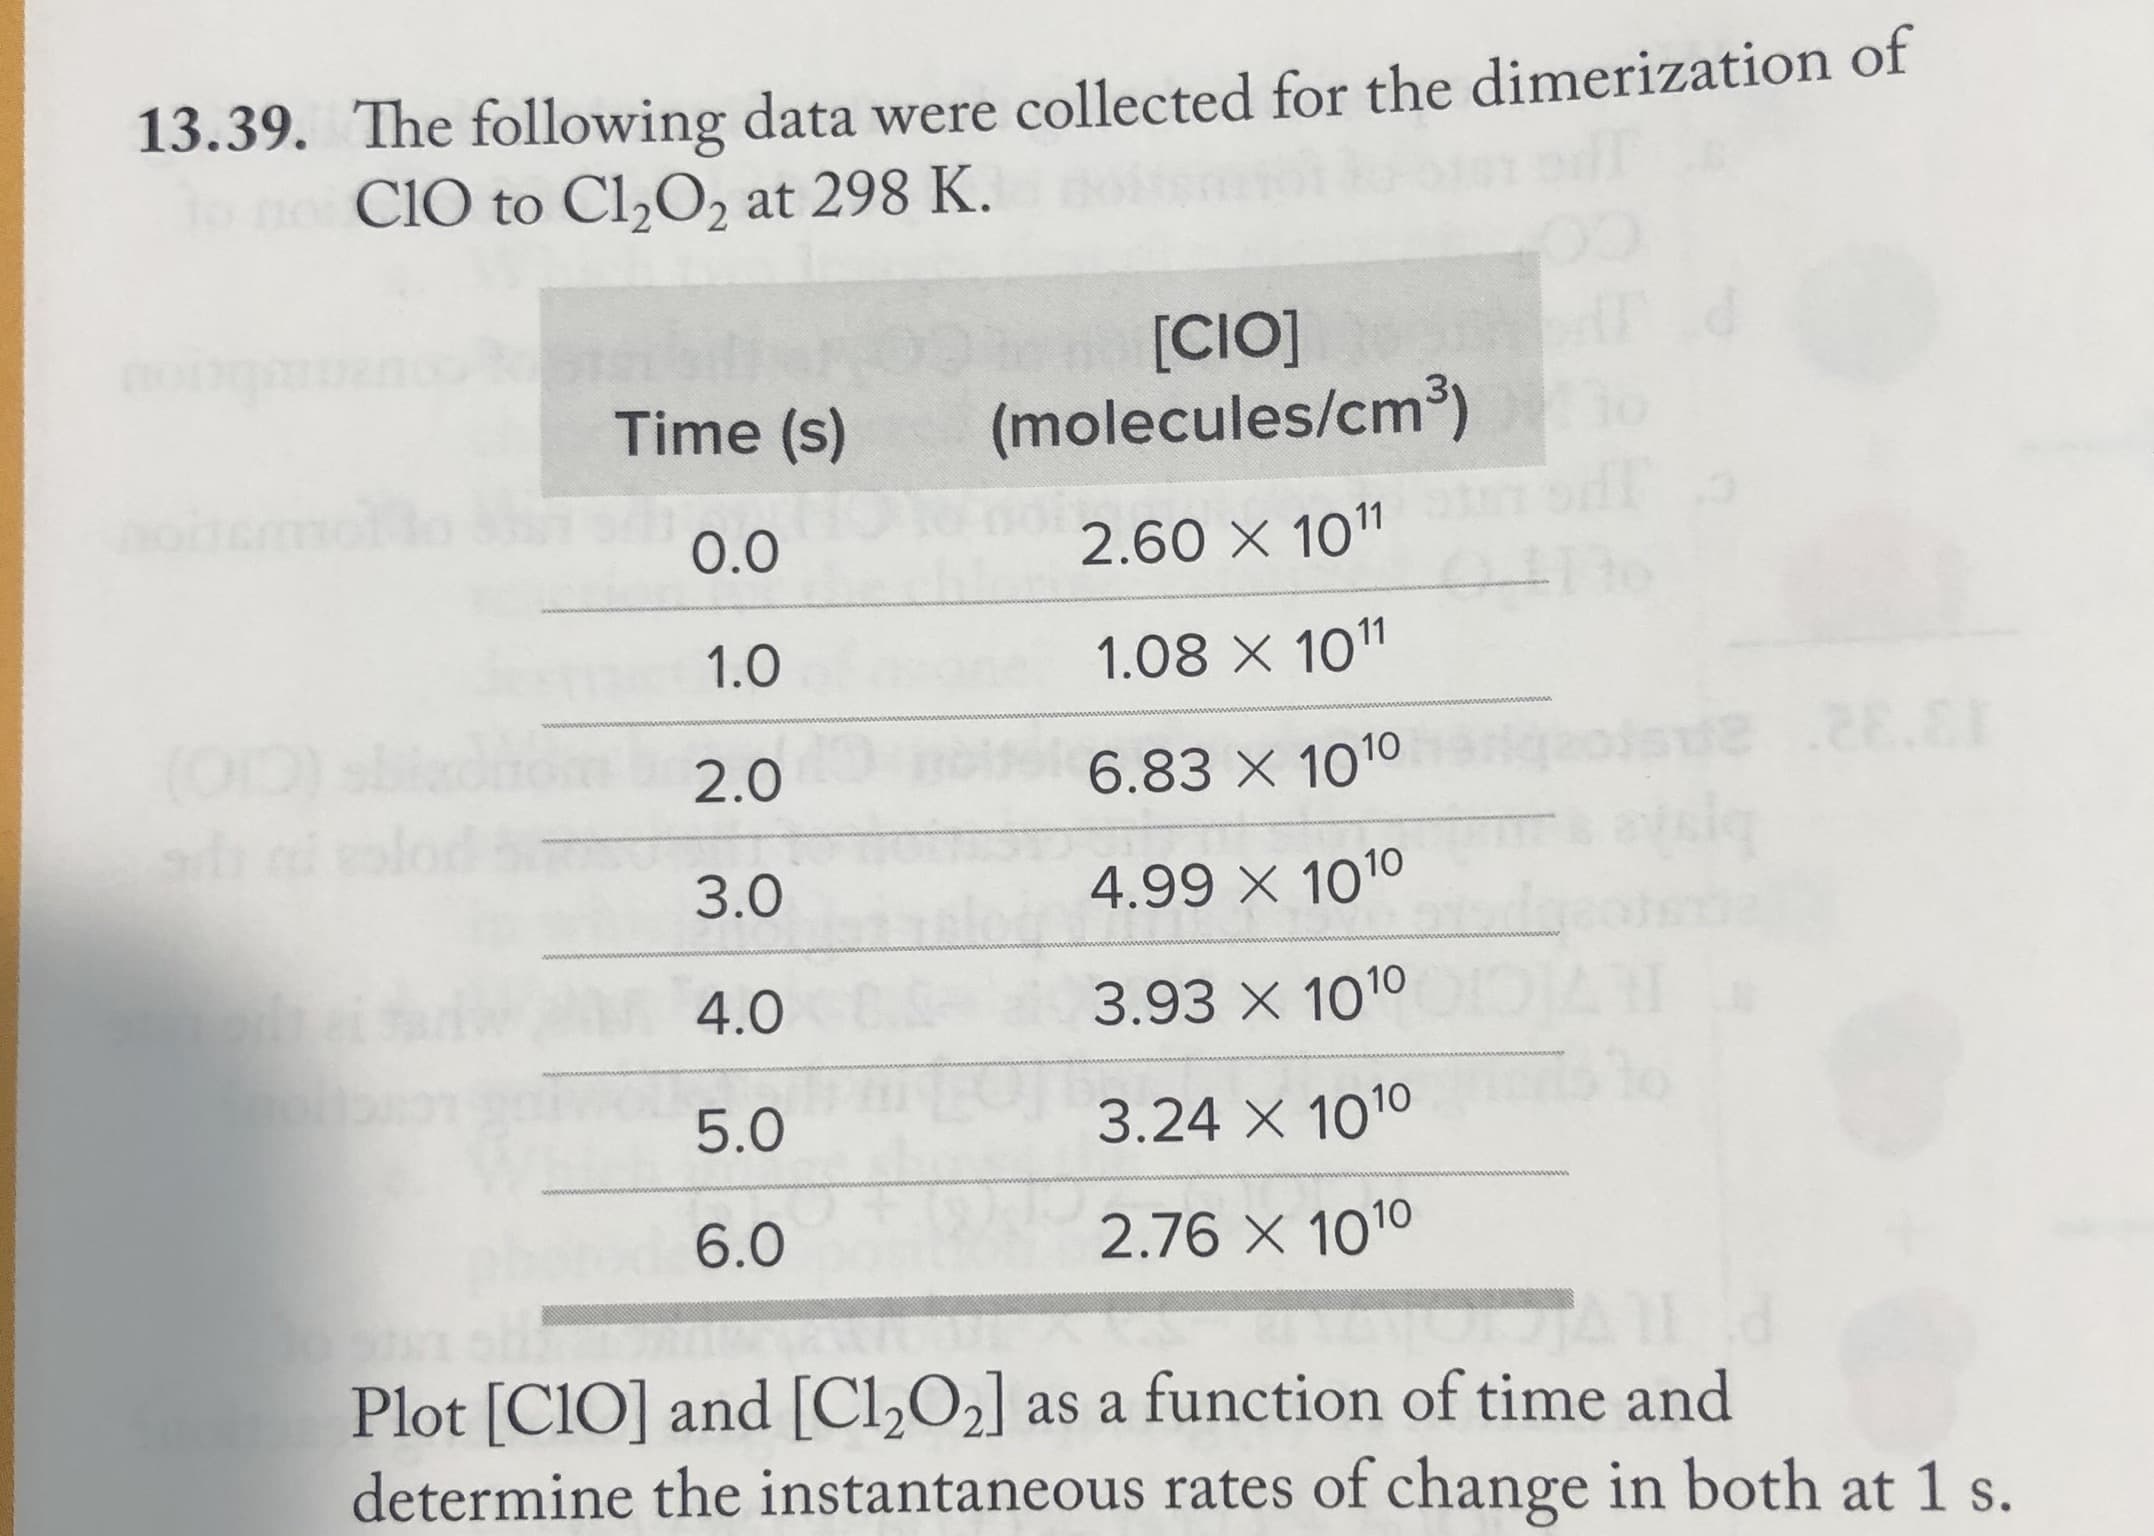 13.39. The following data were collected for the dimerization of
To no Cl0 to Cl,O2 at 298 K.
[CIO]
(molecules/cm³)
Time (s)
onemmo
2.60 X 101"
0.0
1.08 X 101
1.0
6.83 X 1010
2.0
4.99 X 1010
3.0
3.93 X 1010
4.0
3.24 X 1010
5.0
6.0
2.76 X 1010
Plot [ClO] and [C1½O2] as a function of time and
determine the instantaneous rates of change in both at 1 s.
